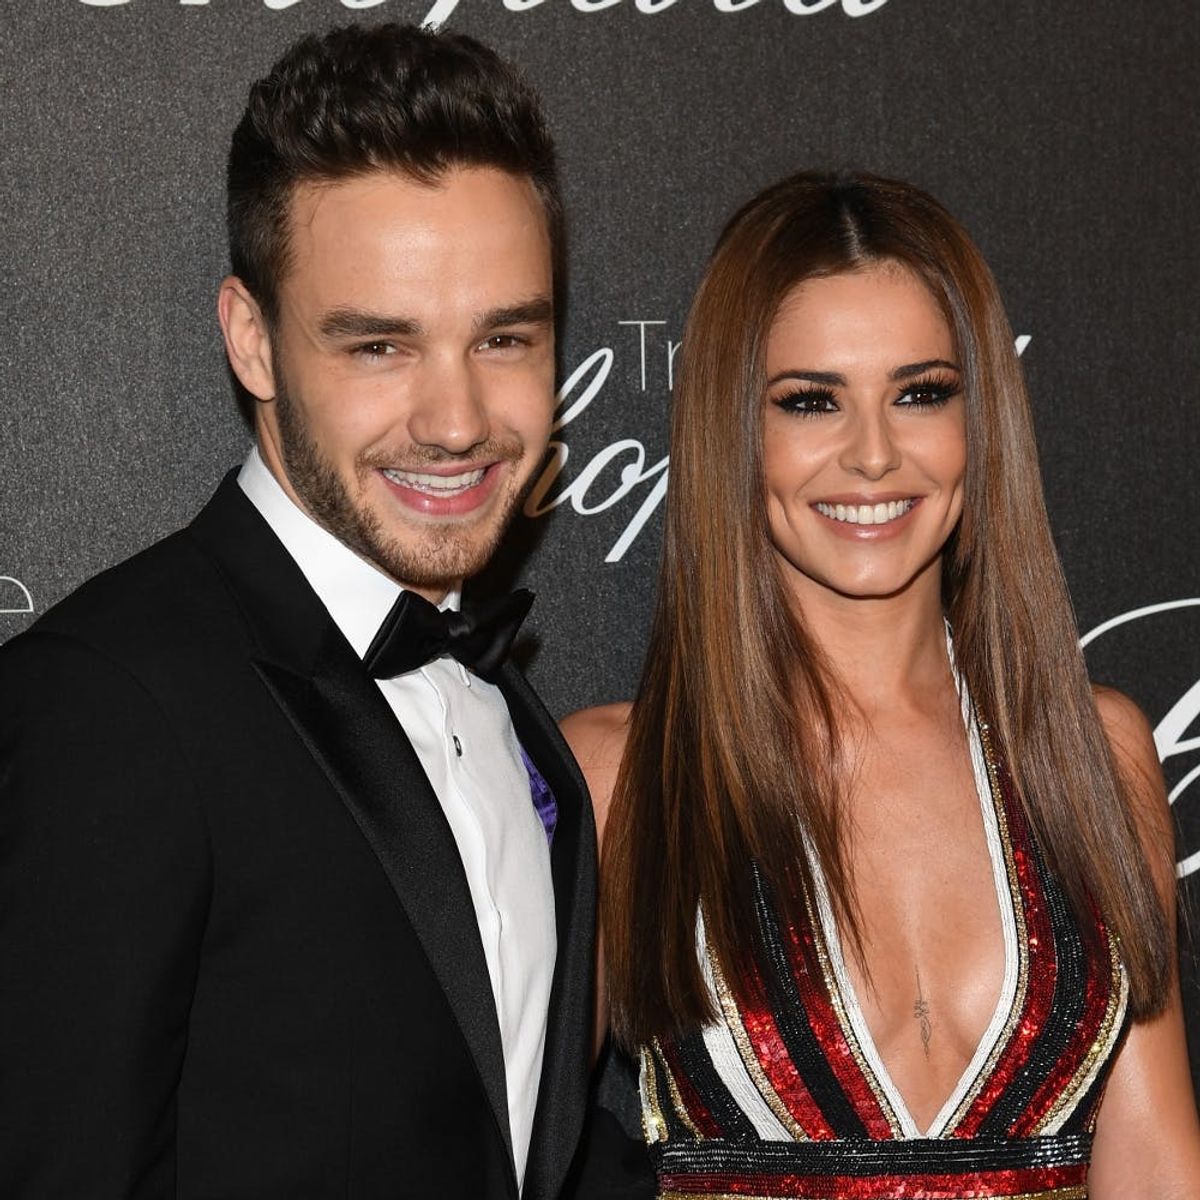 One Direction Fans Are FREAKING OUT Over Liam Payne and Cheryl Cole’s Baby News